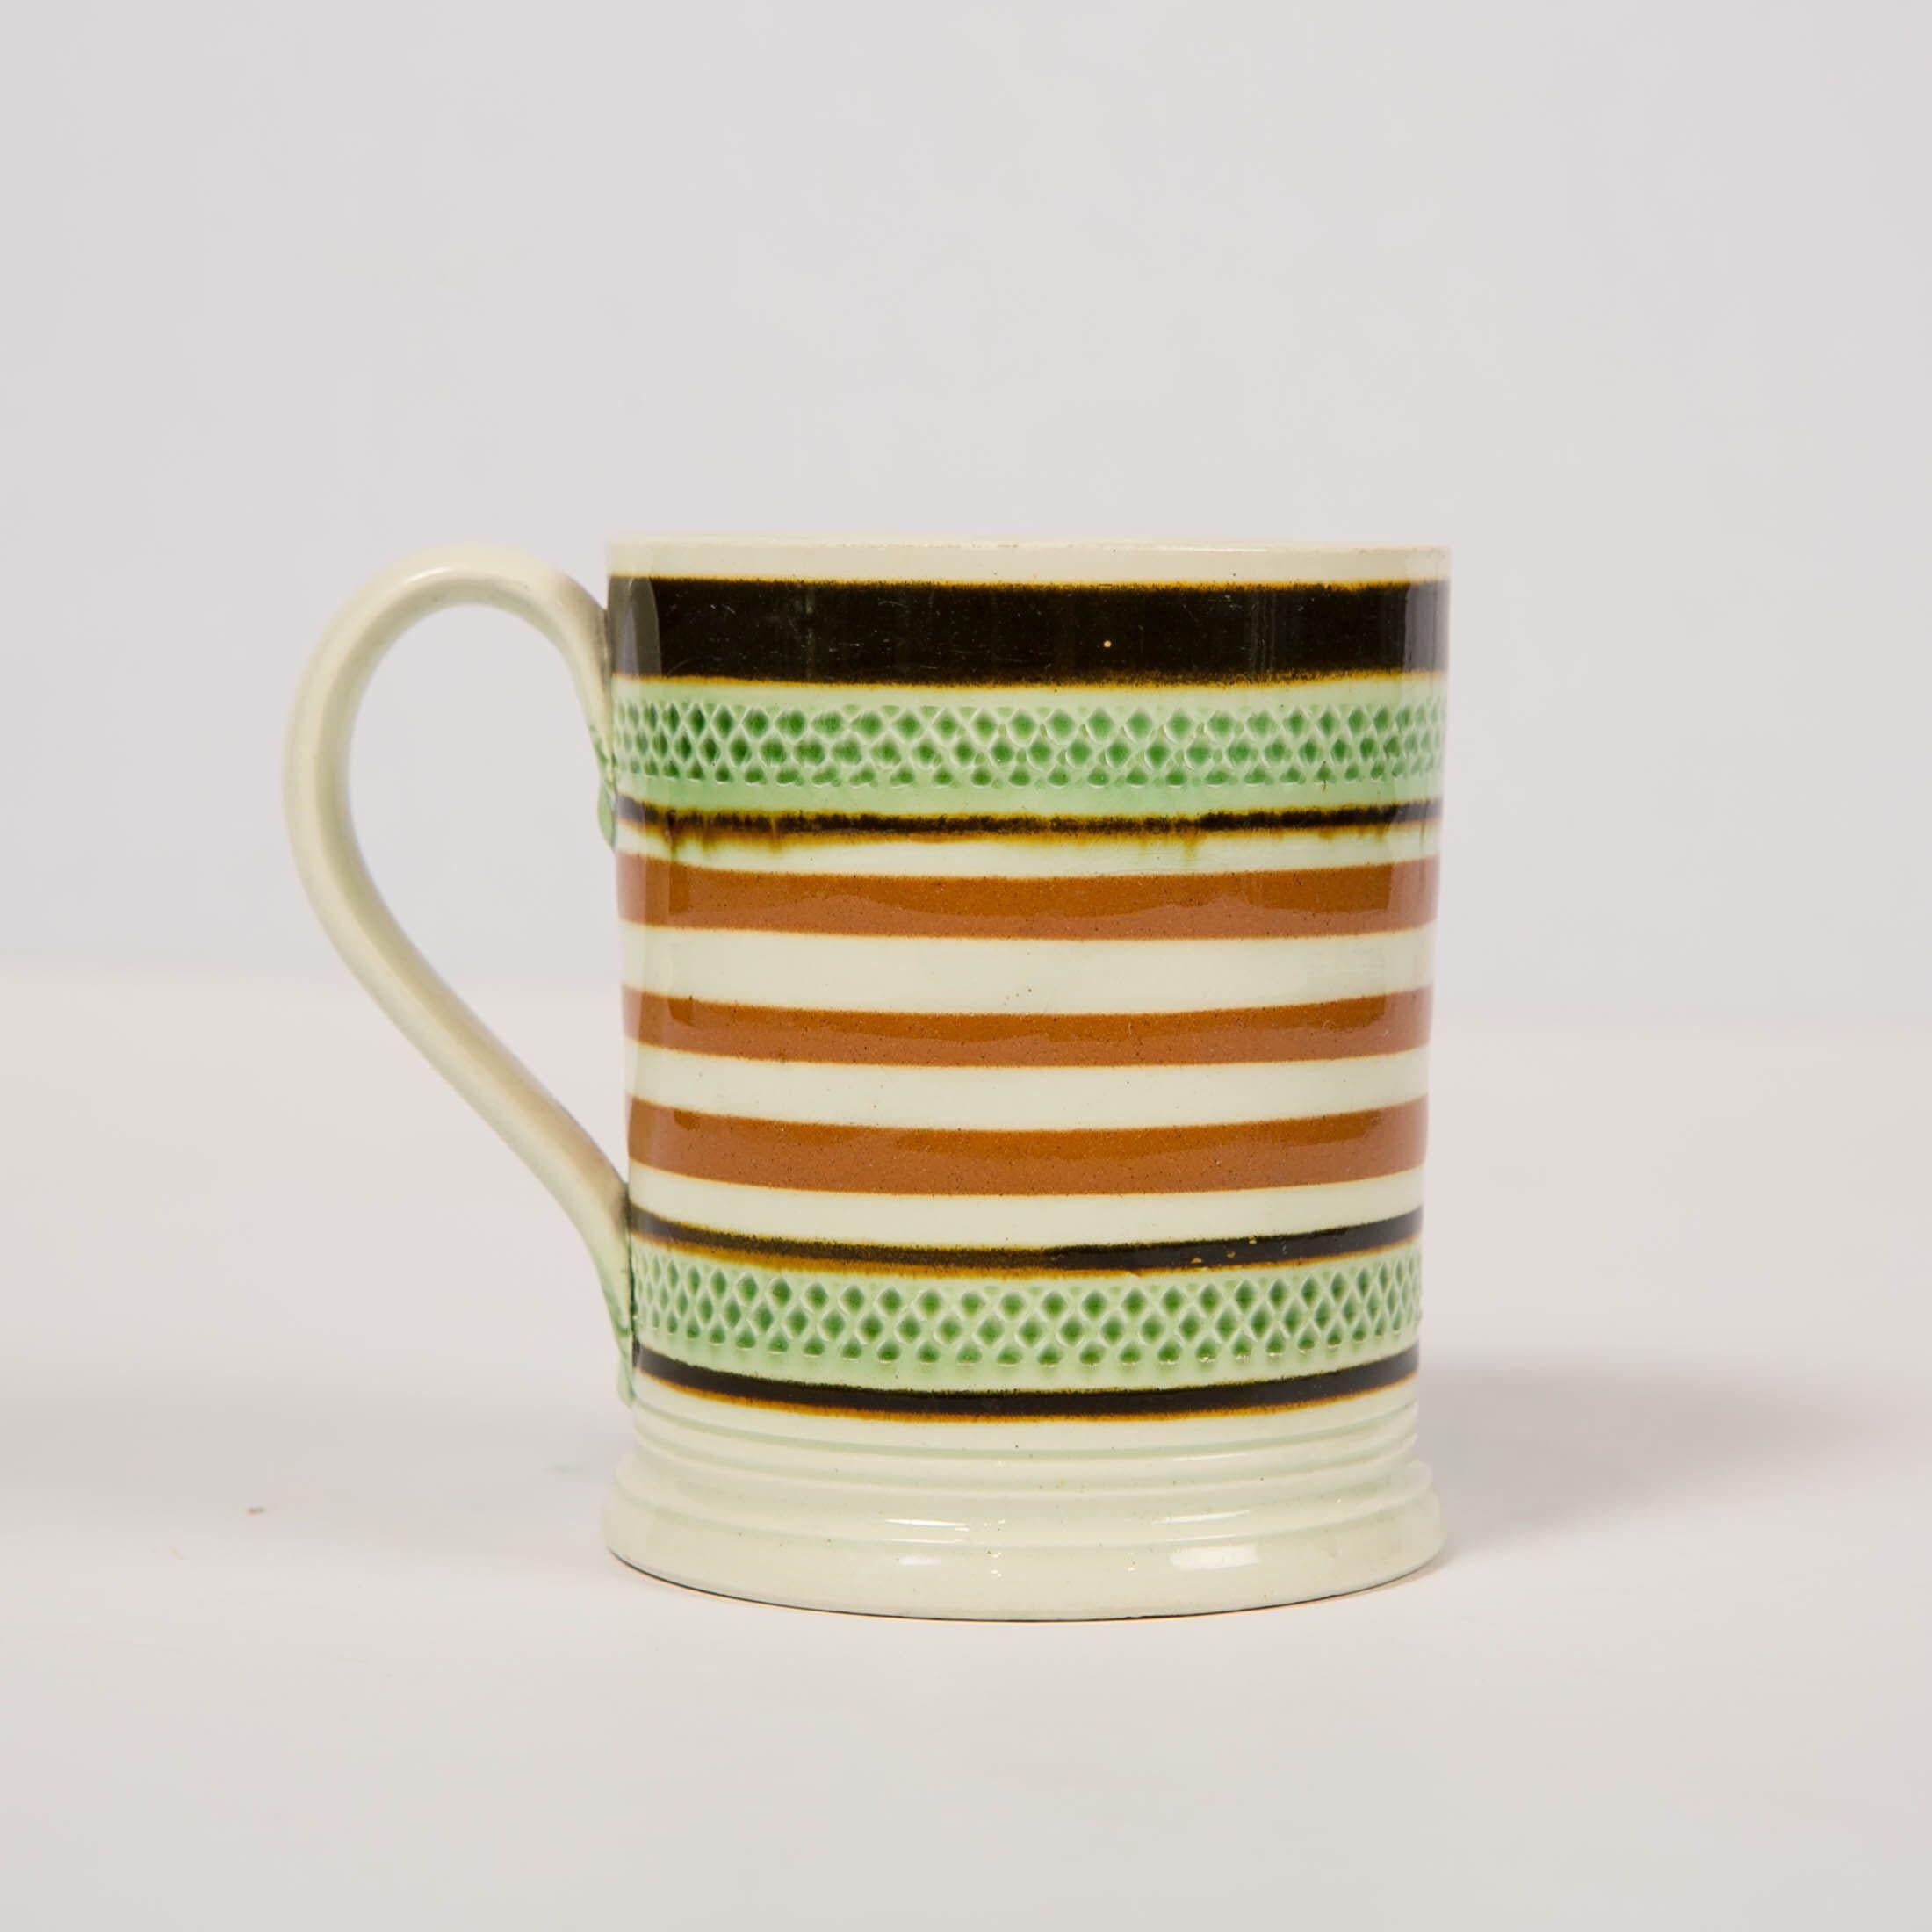 We are pleased to offer this beautiful Mochaware mug, which was turned on a lathe and decorated with slip bands of light and midnight brown. Bands of impressed green glazed diamonds can be seen along the top edge and along the bottom of the mug. The